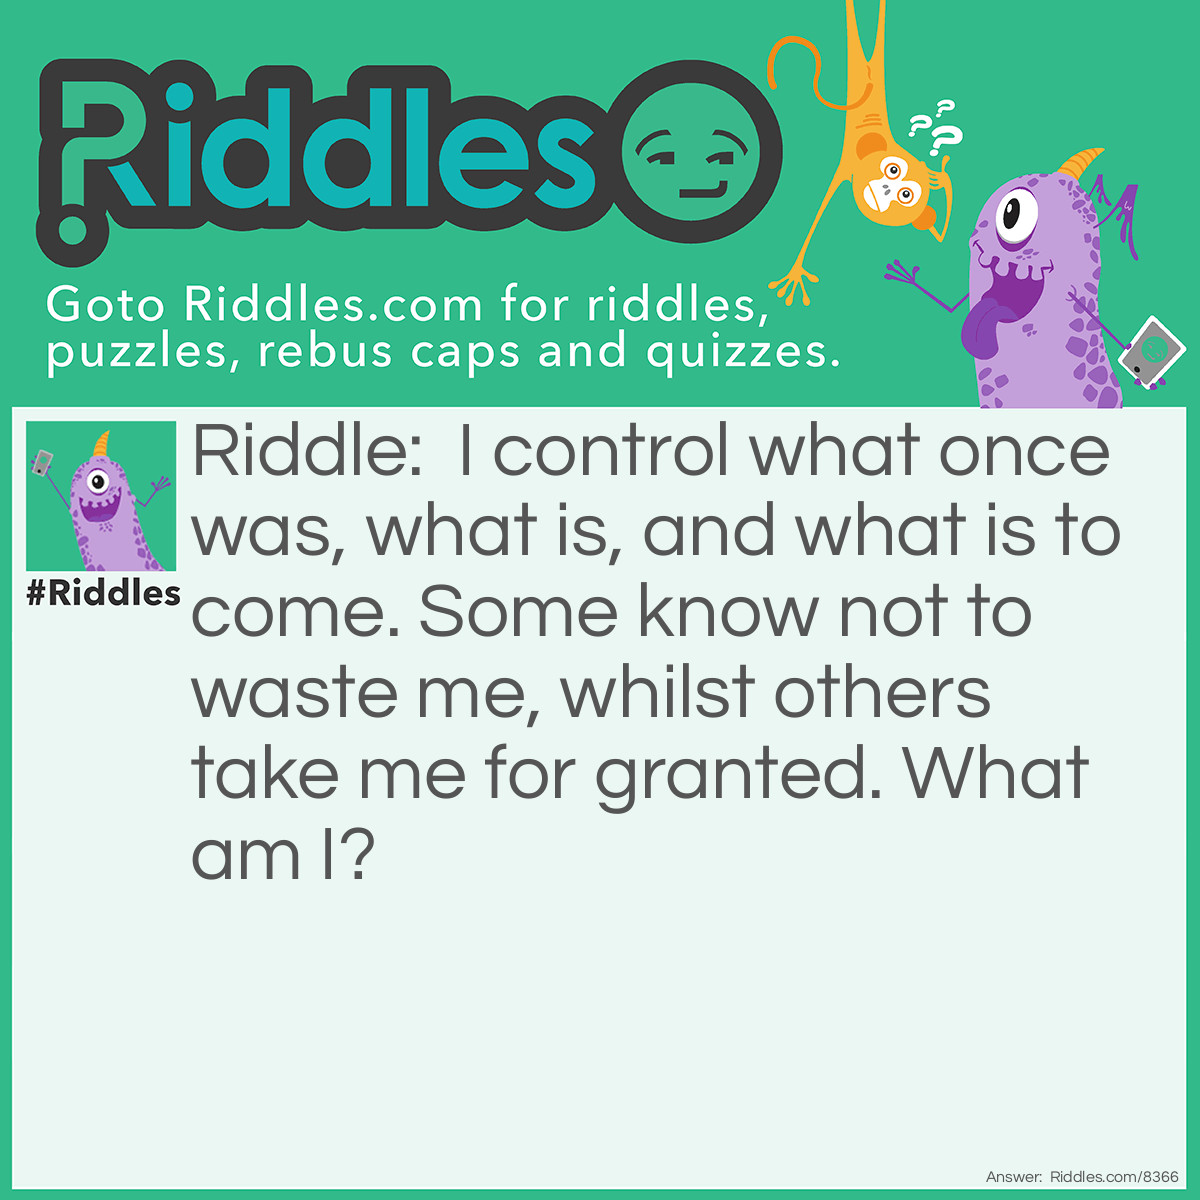 Riddle: I control what once was, what is, and what is to come. Some know not to waste me, whilst others take me for granted. What am I? Answer: Time.